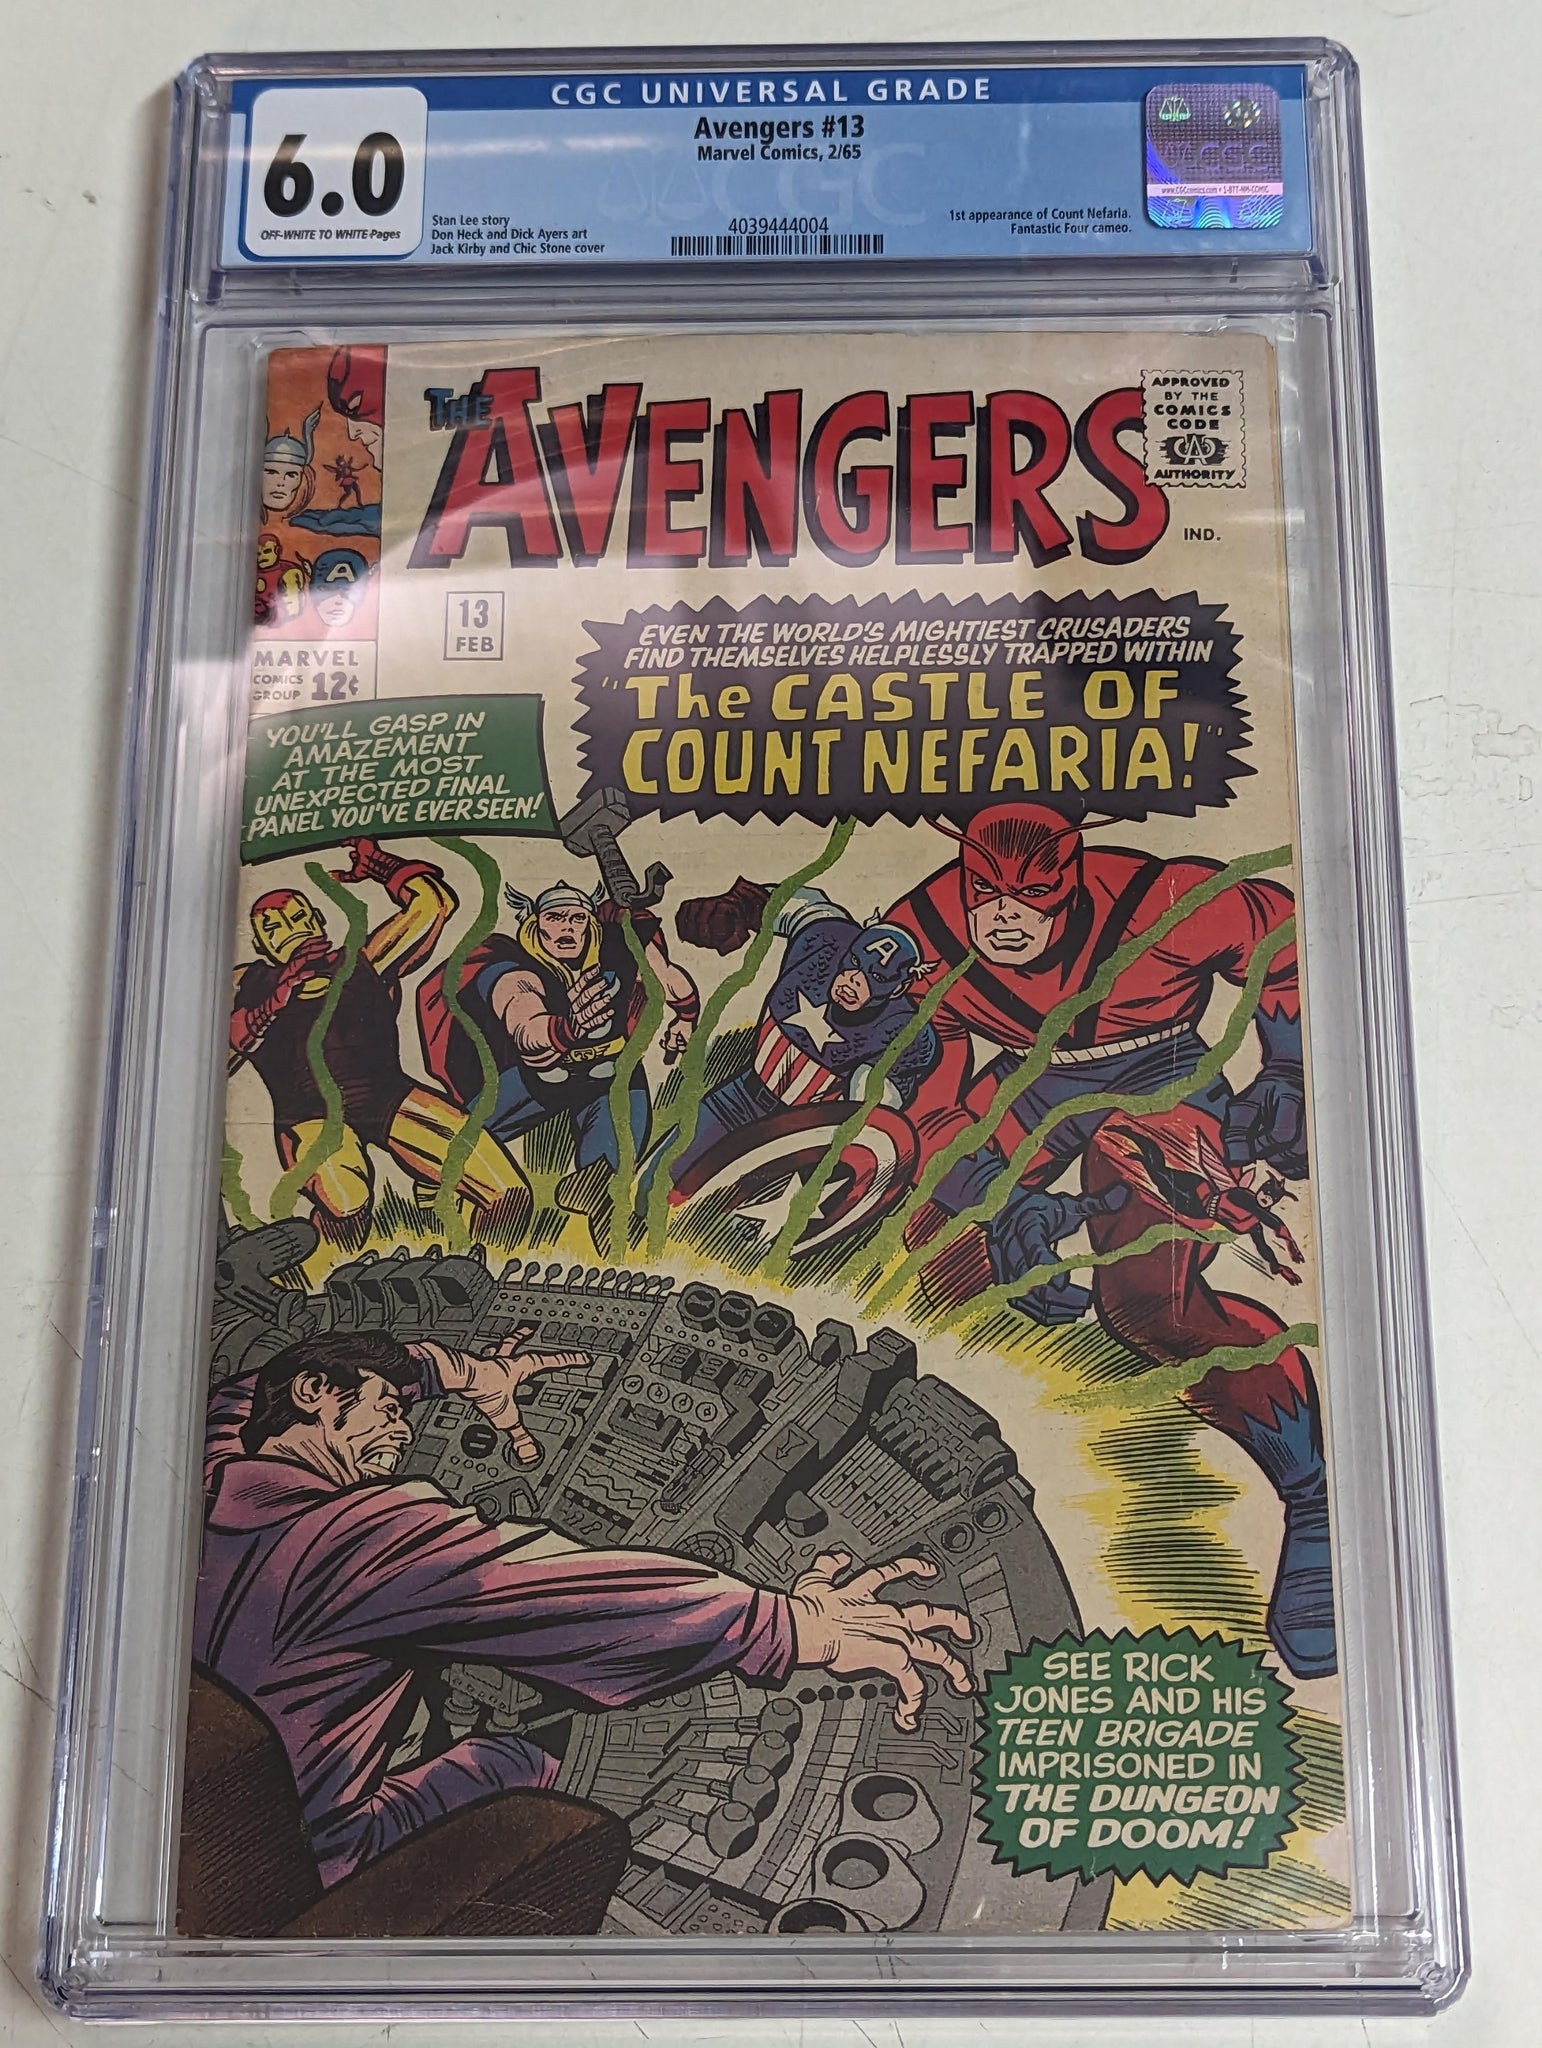 Avengers #13 Certified Guaranty Company (CGC) Graded 6.0 - 1st Appearance of Count Nefaria